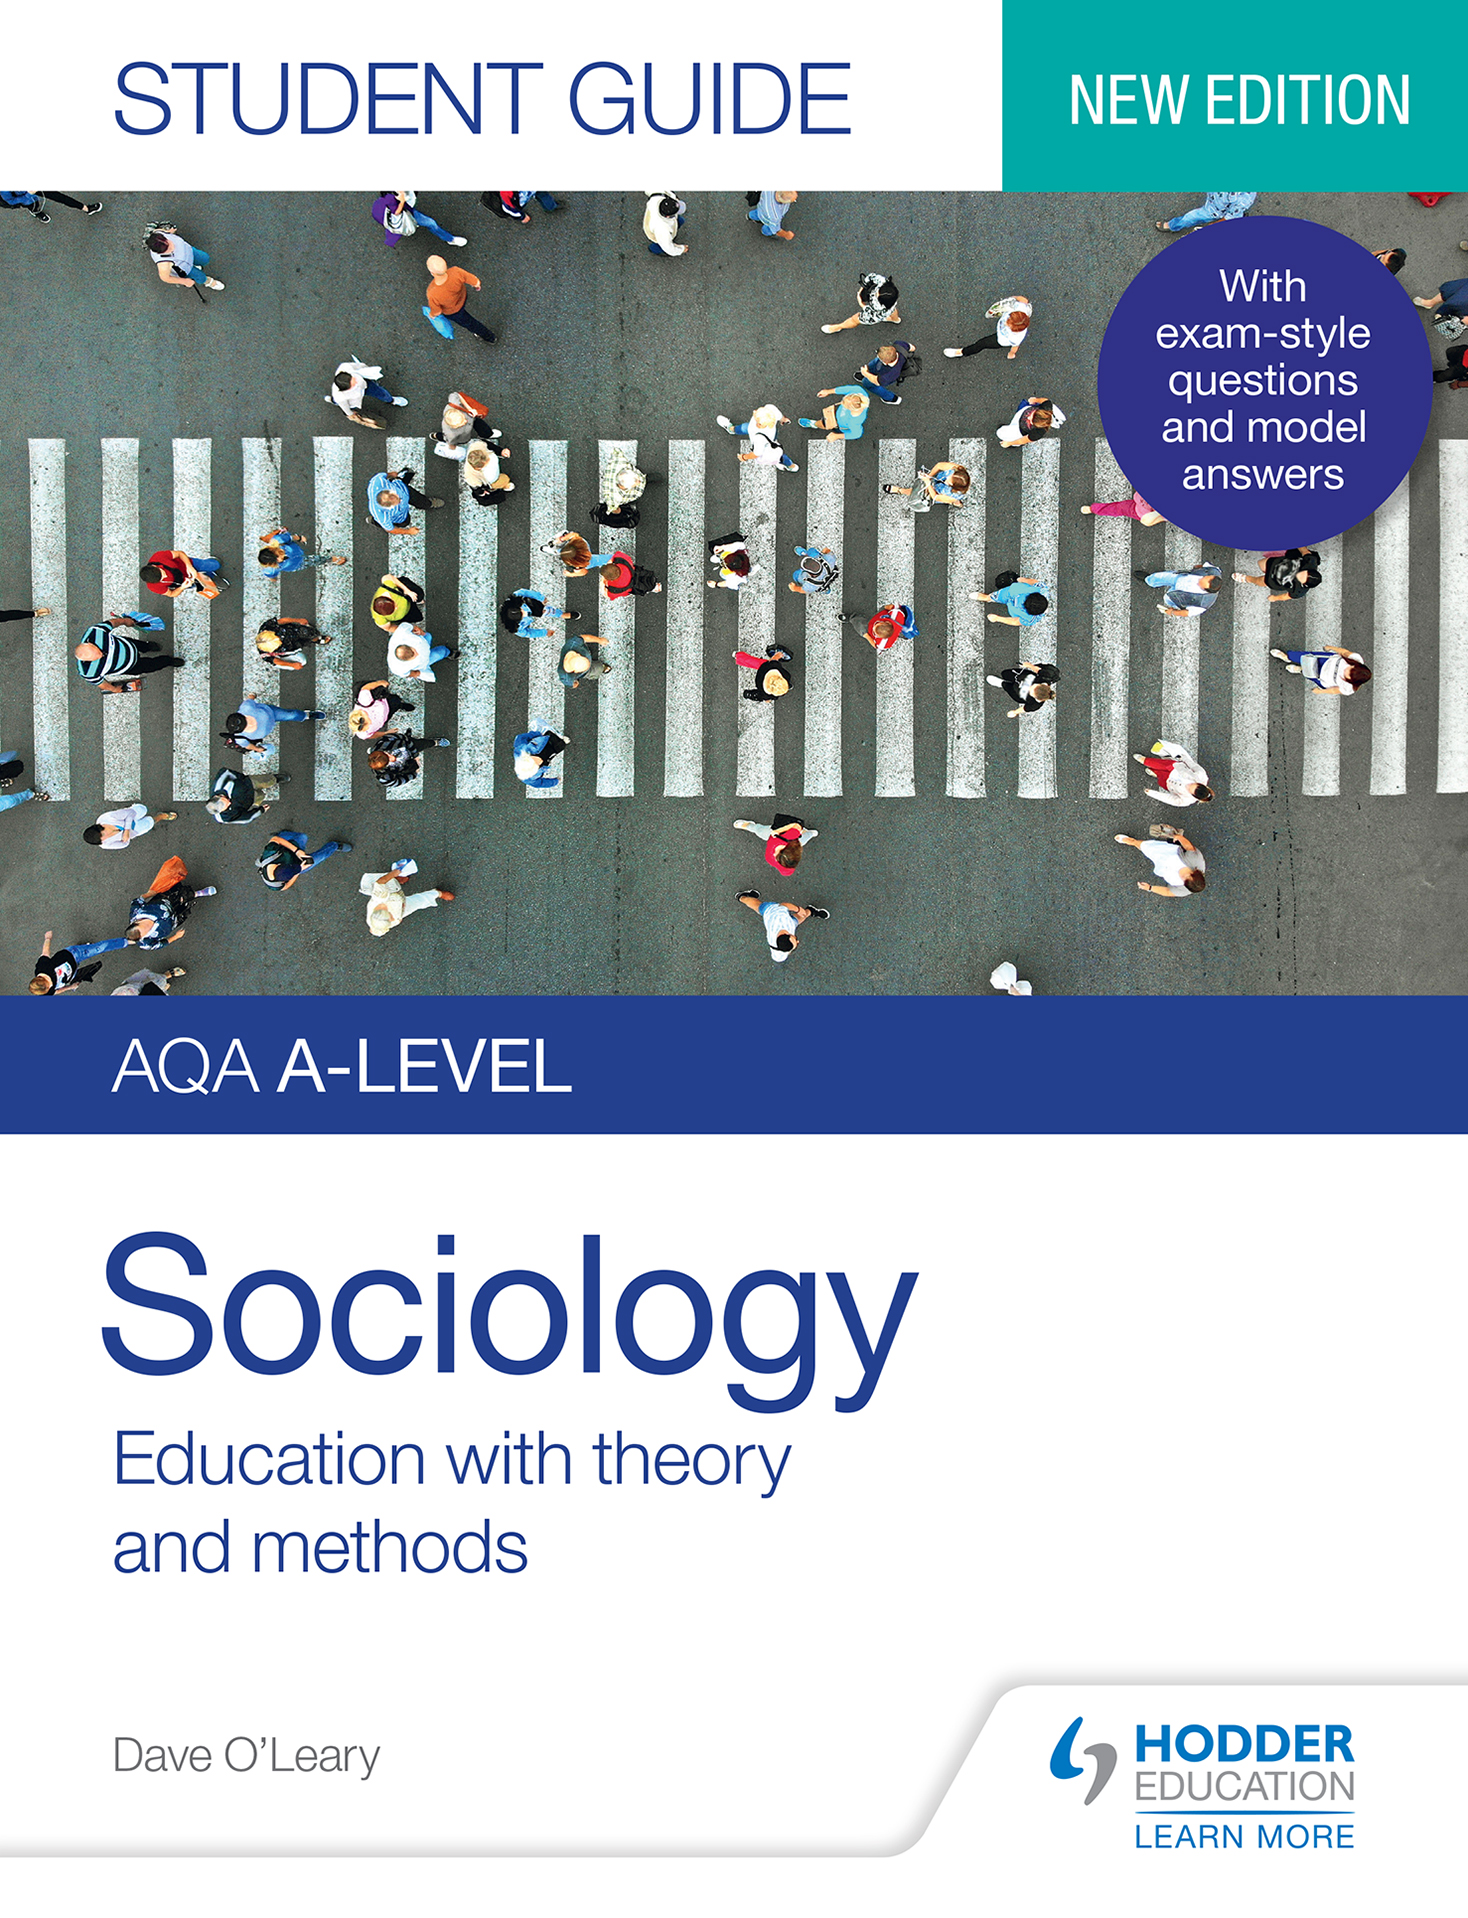 AQA A-level Sociology Student Guide 1: Education with theory and